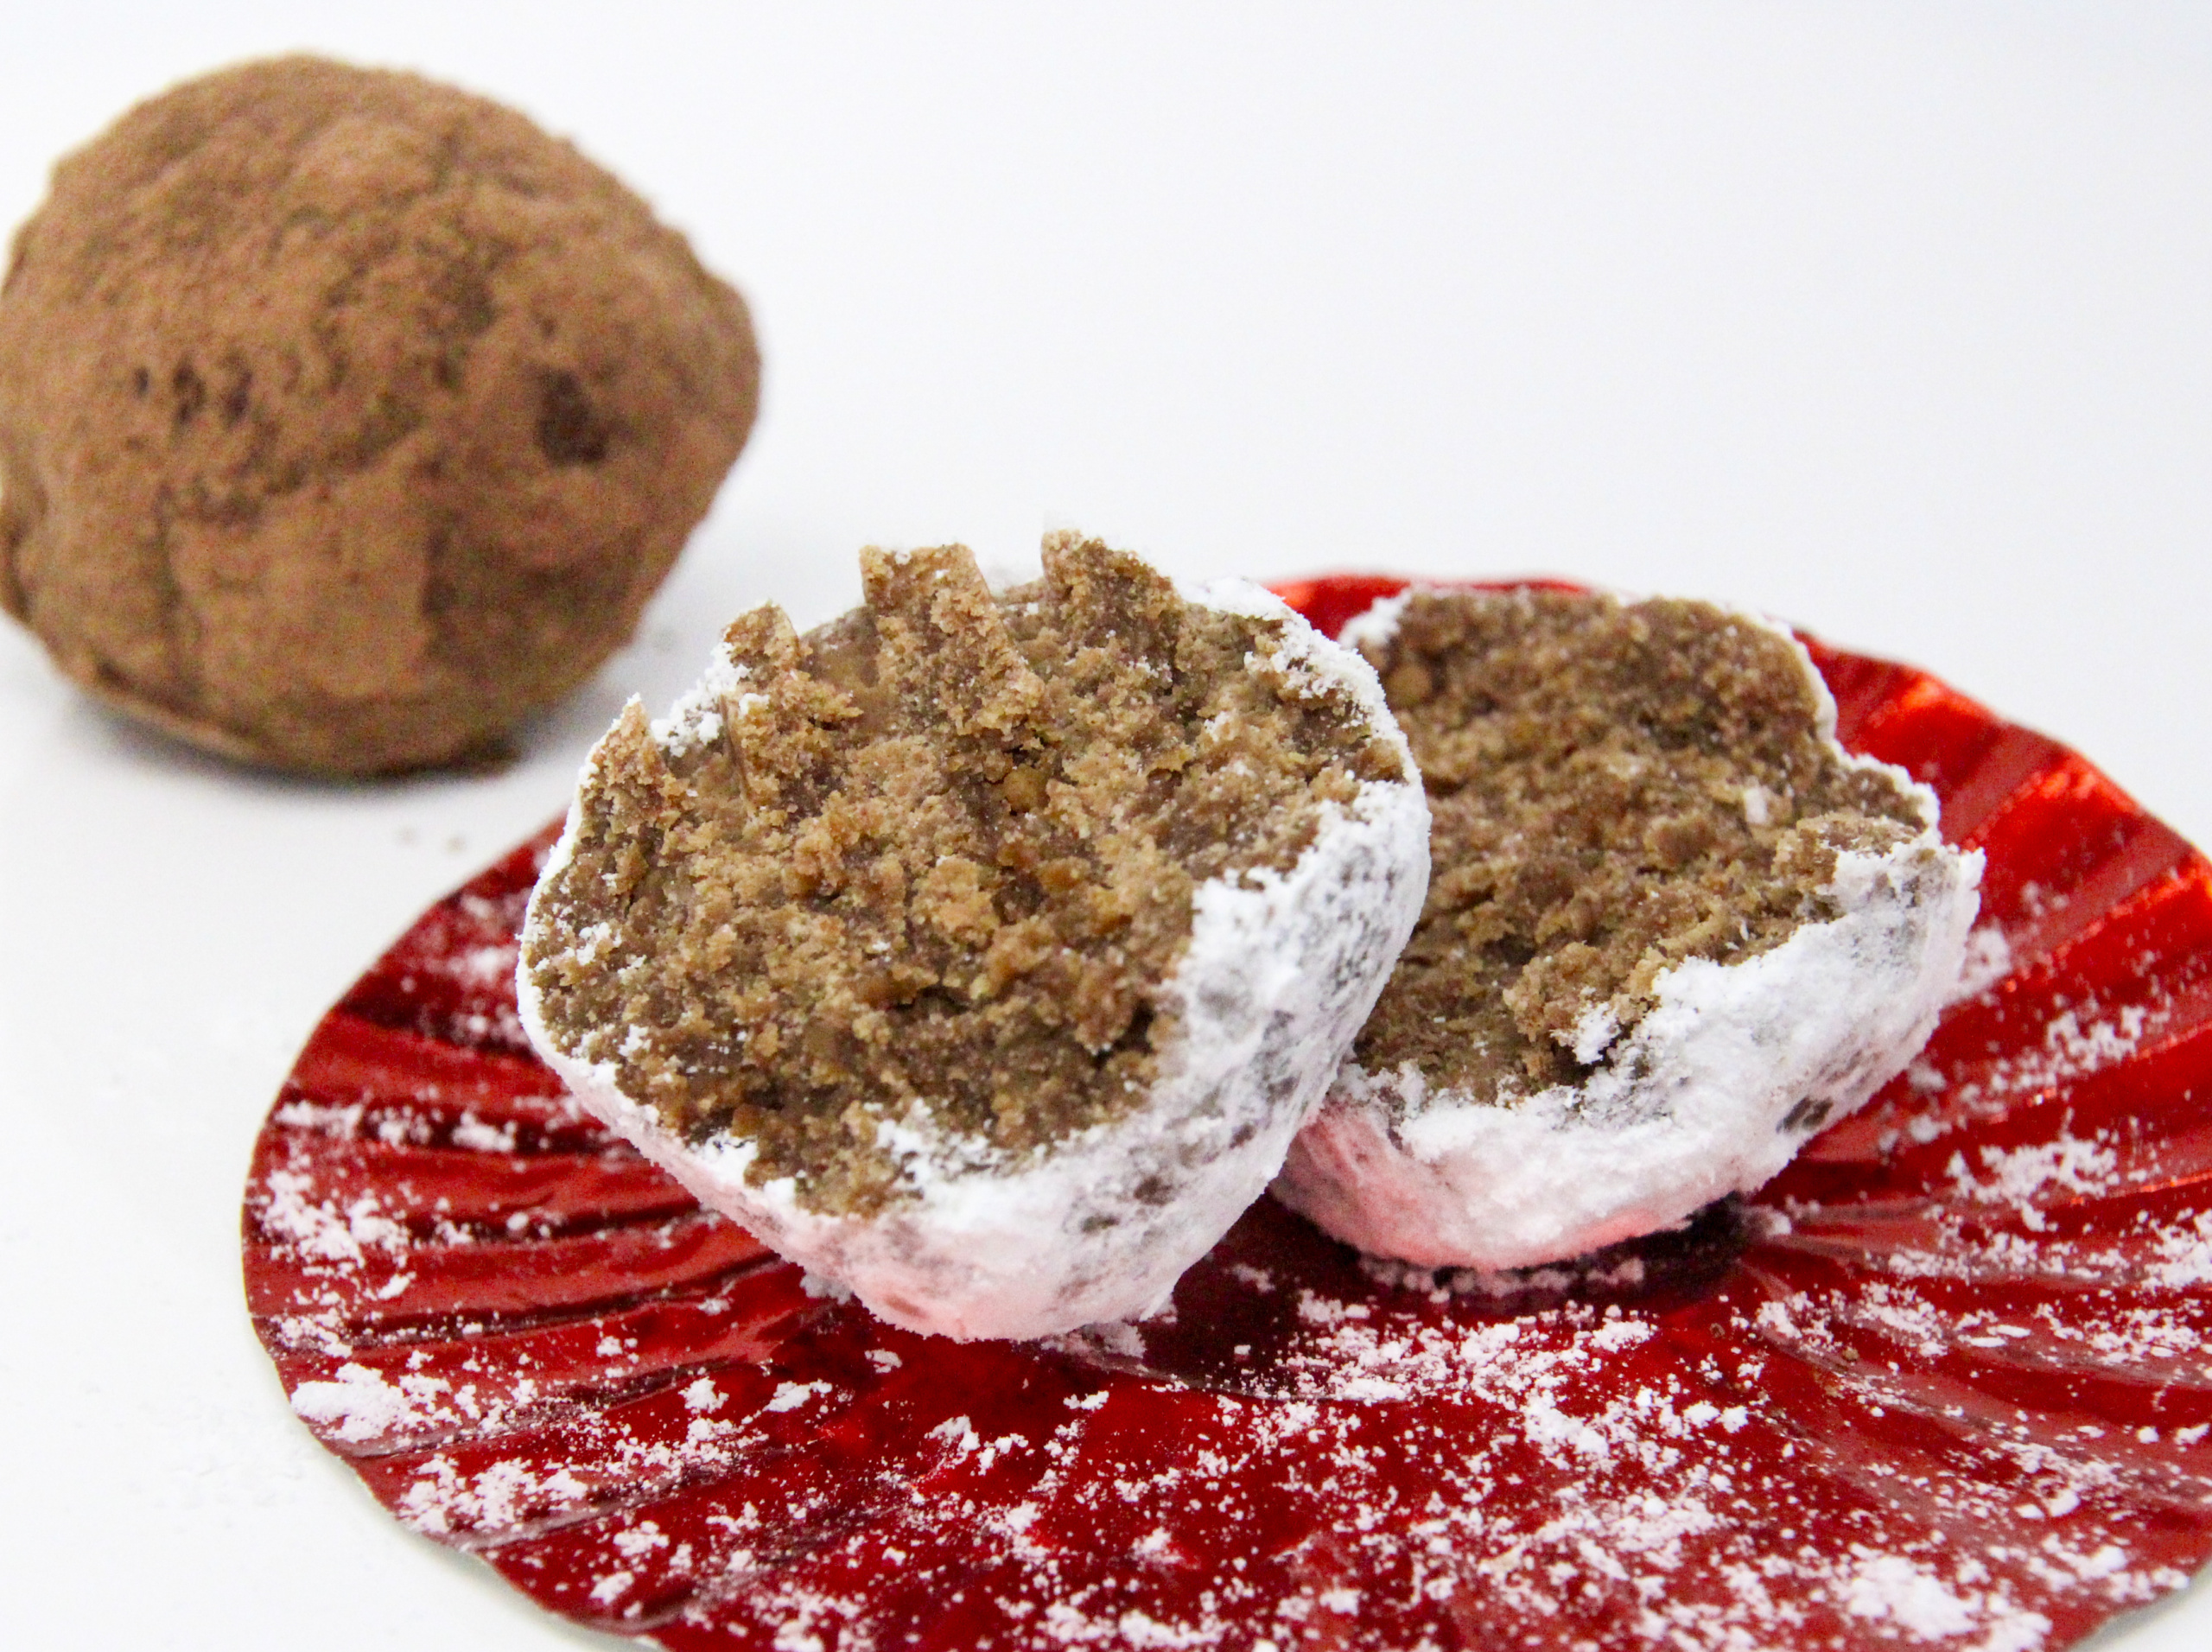 No-Bake Rum Ball Cookies only require a few simple ingredients and a quick whirl in the food process for delicious, easy to make treats. Recipe created by Cinnamon & Sugar for Catherine Bruns, author of SEASONED WITH MURDER. 